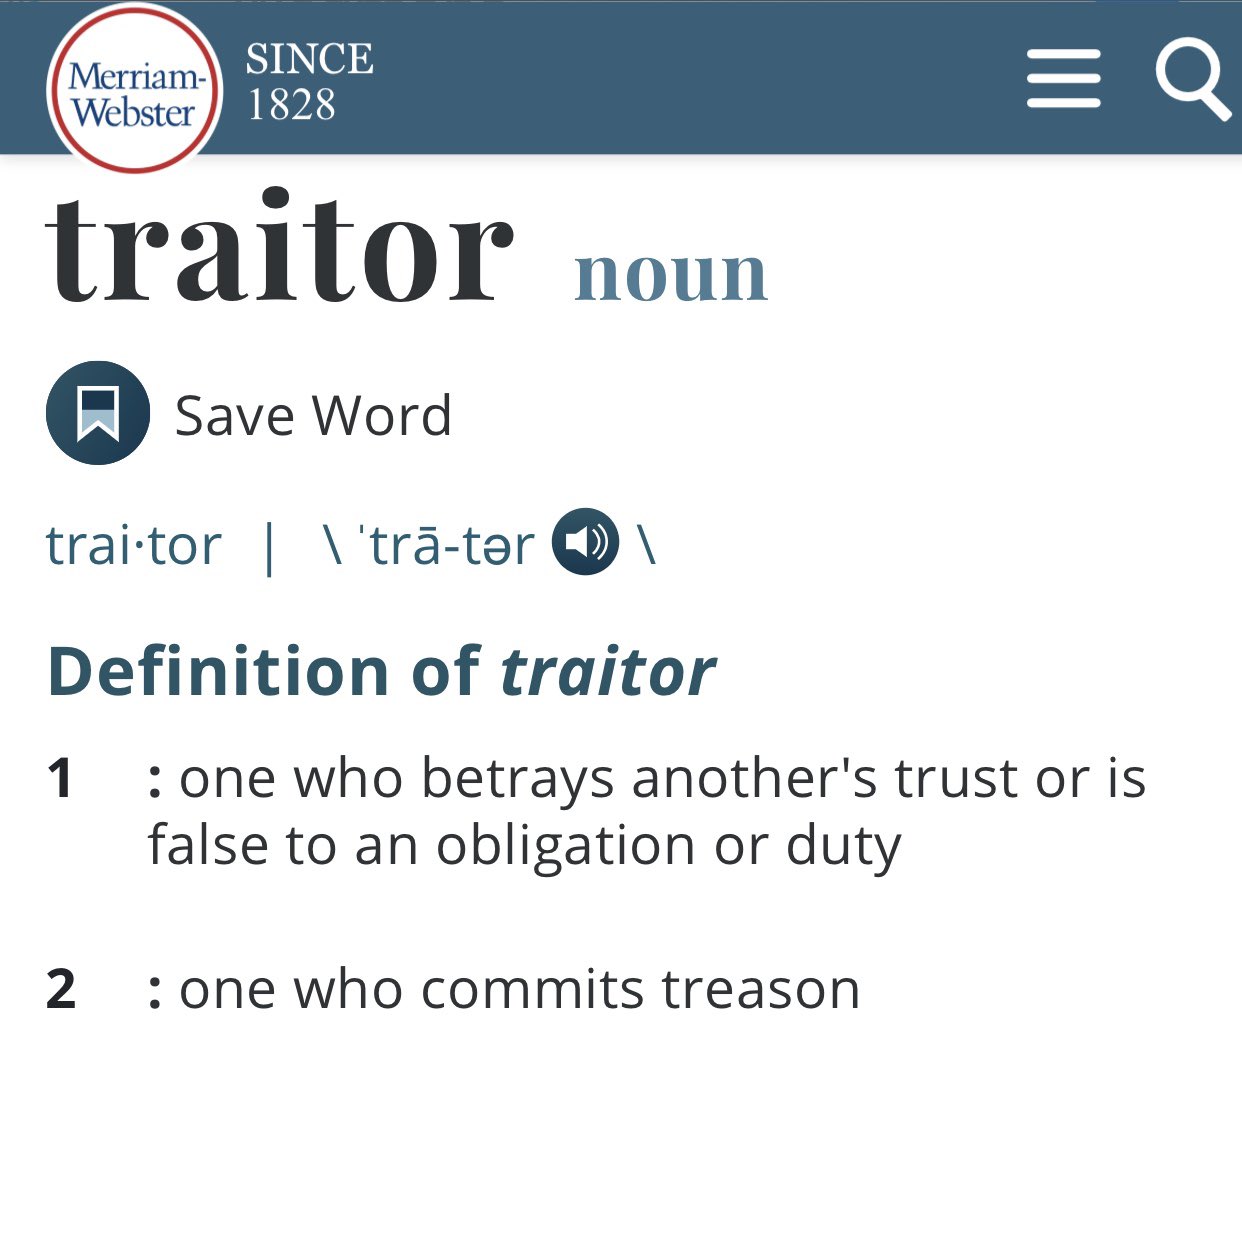 TRAITOR meaning, definition & pronunciation, What is TRAITOR?